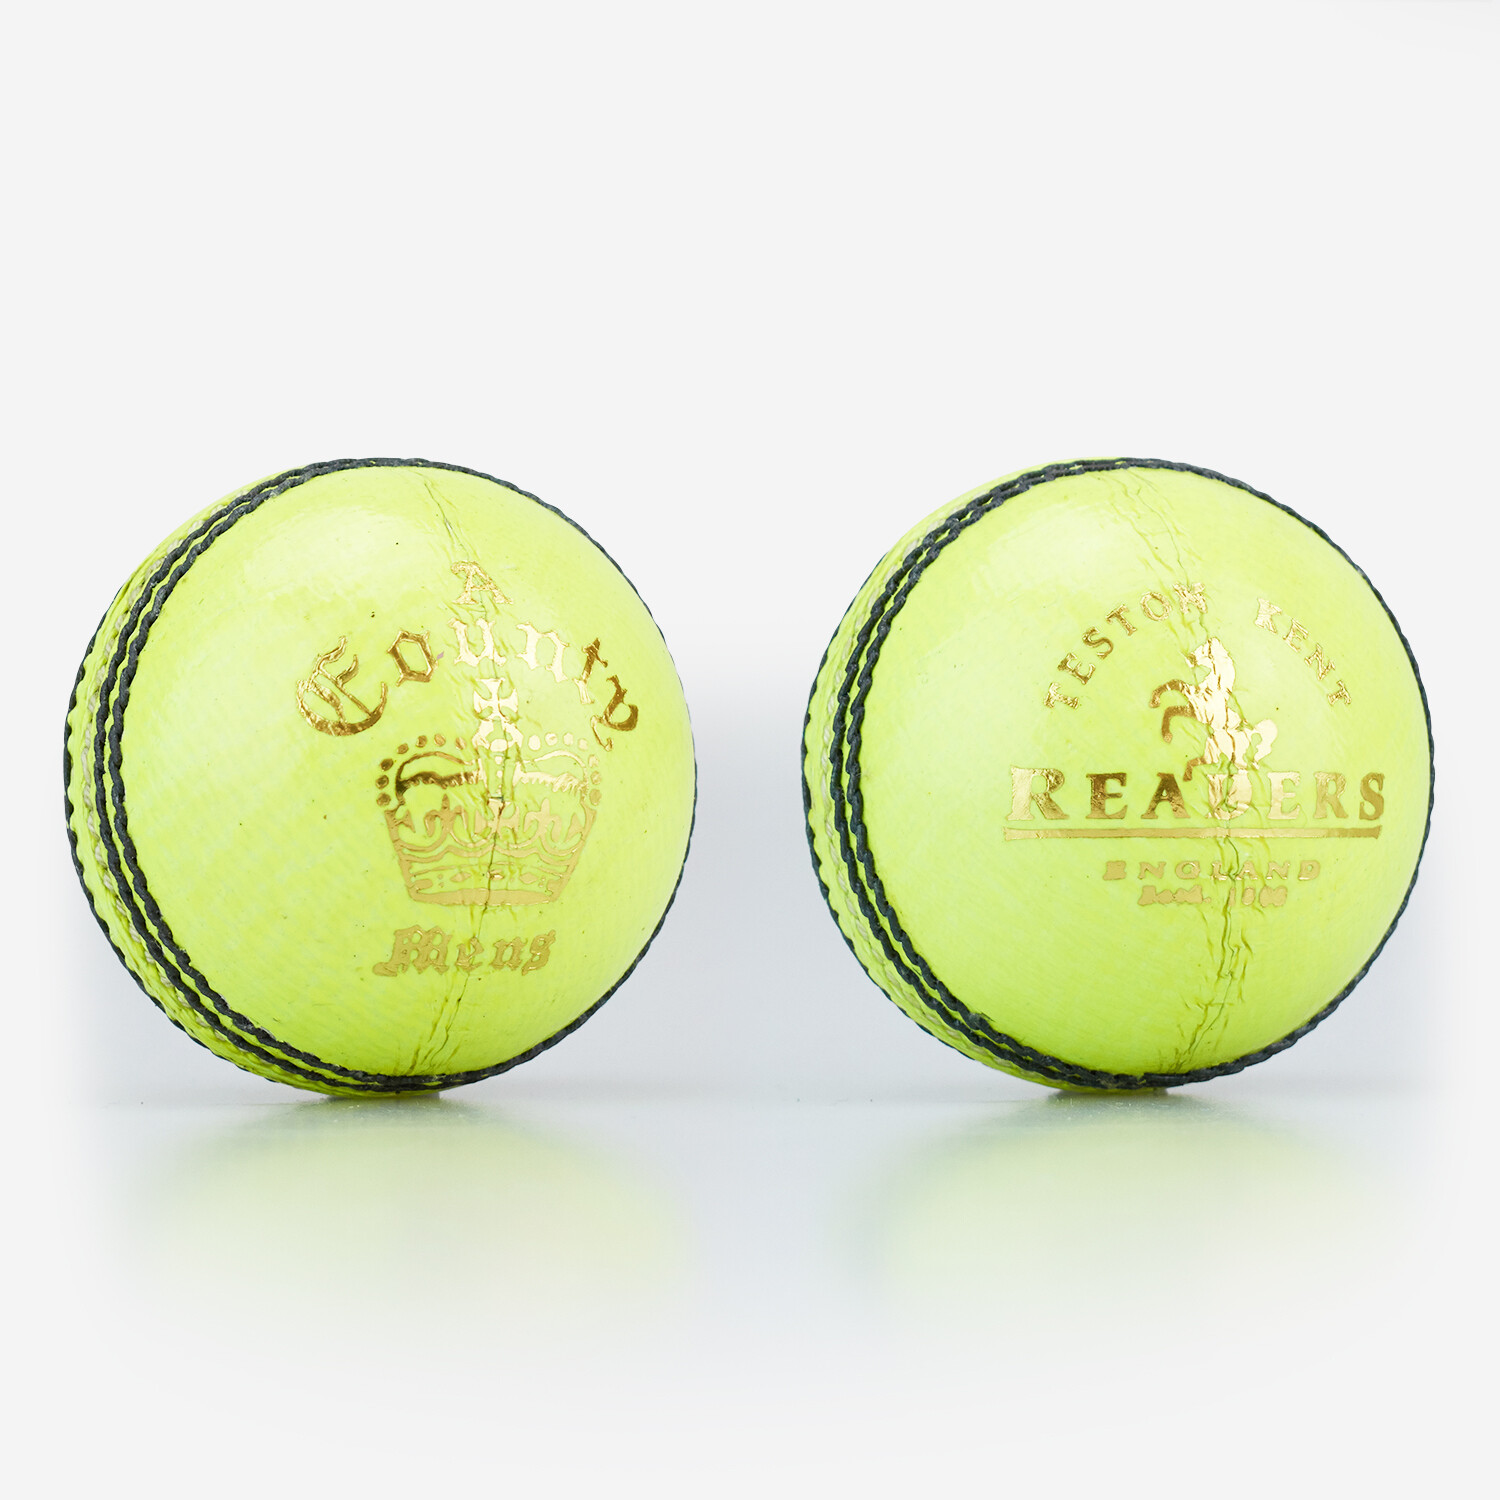 Readers County Crown A Yellow Leather Cricket Ball (Mens Only)